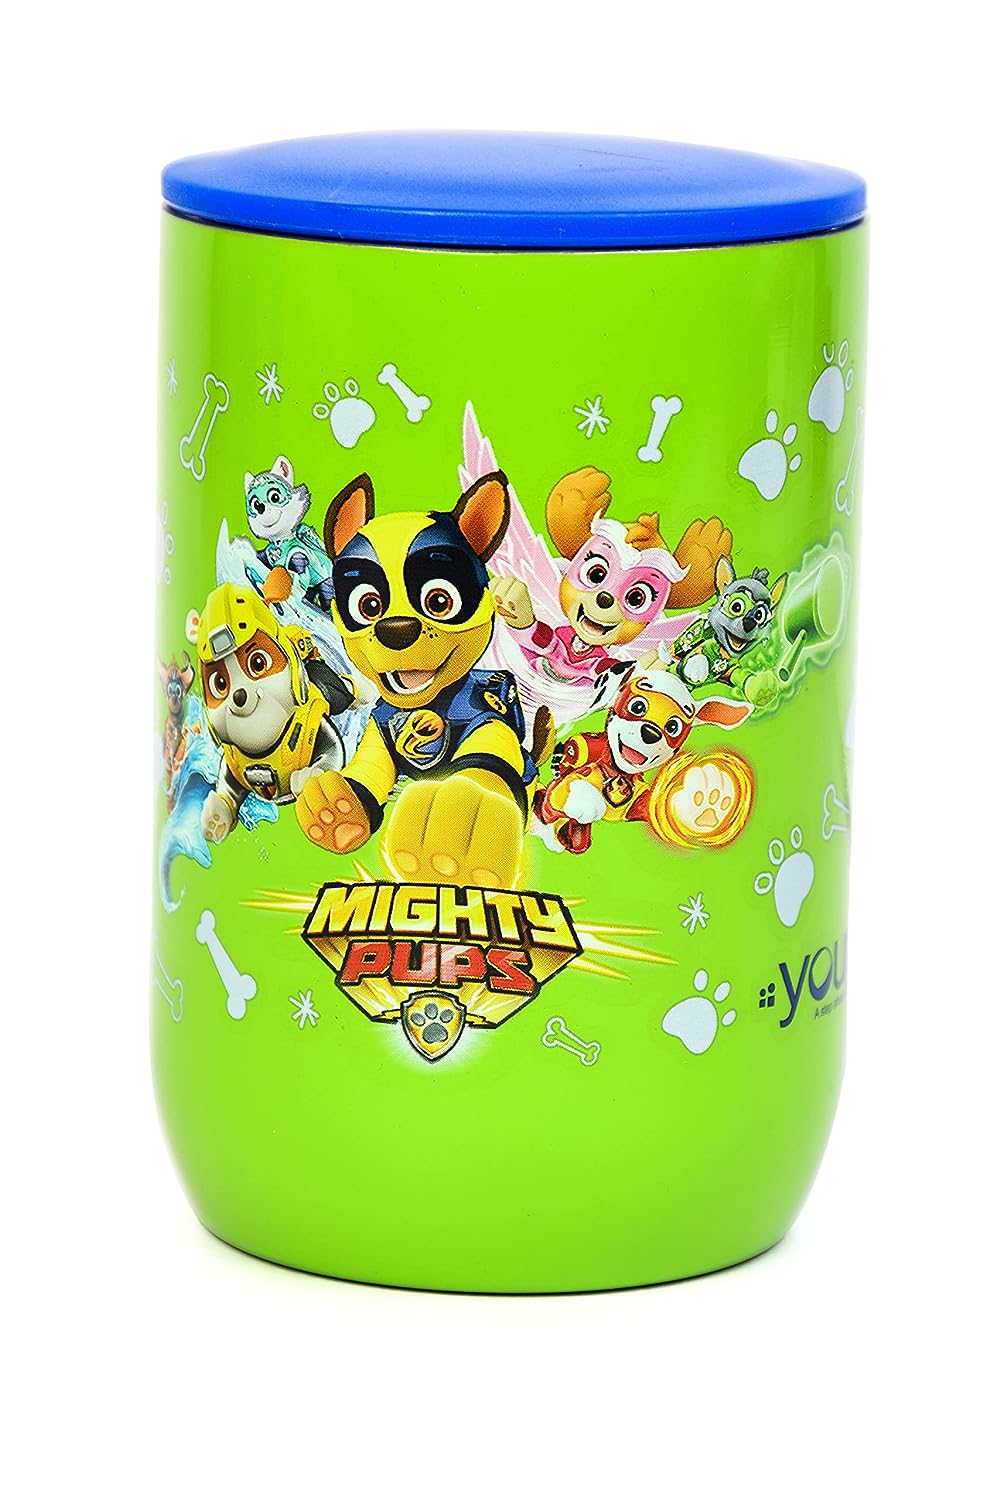 YOUP Stainless Steel Green Color Paw Patrol Mighty pups Kids Insulated Mug with Cap - 320 ml